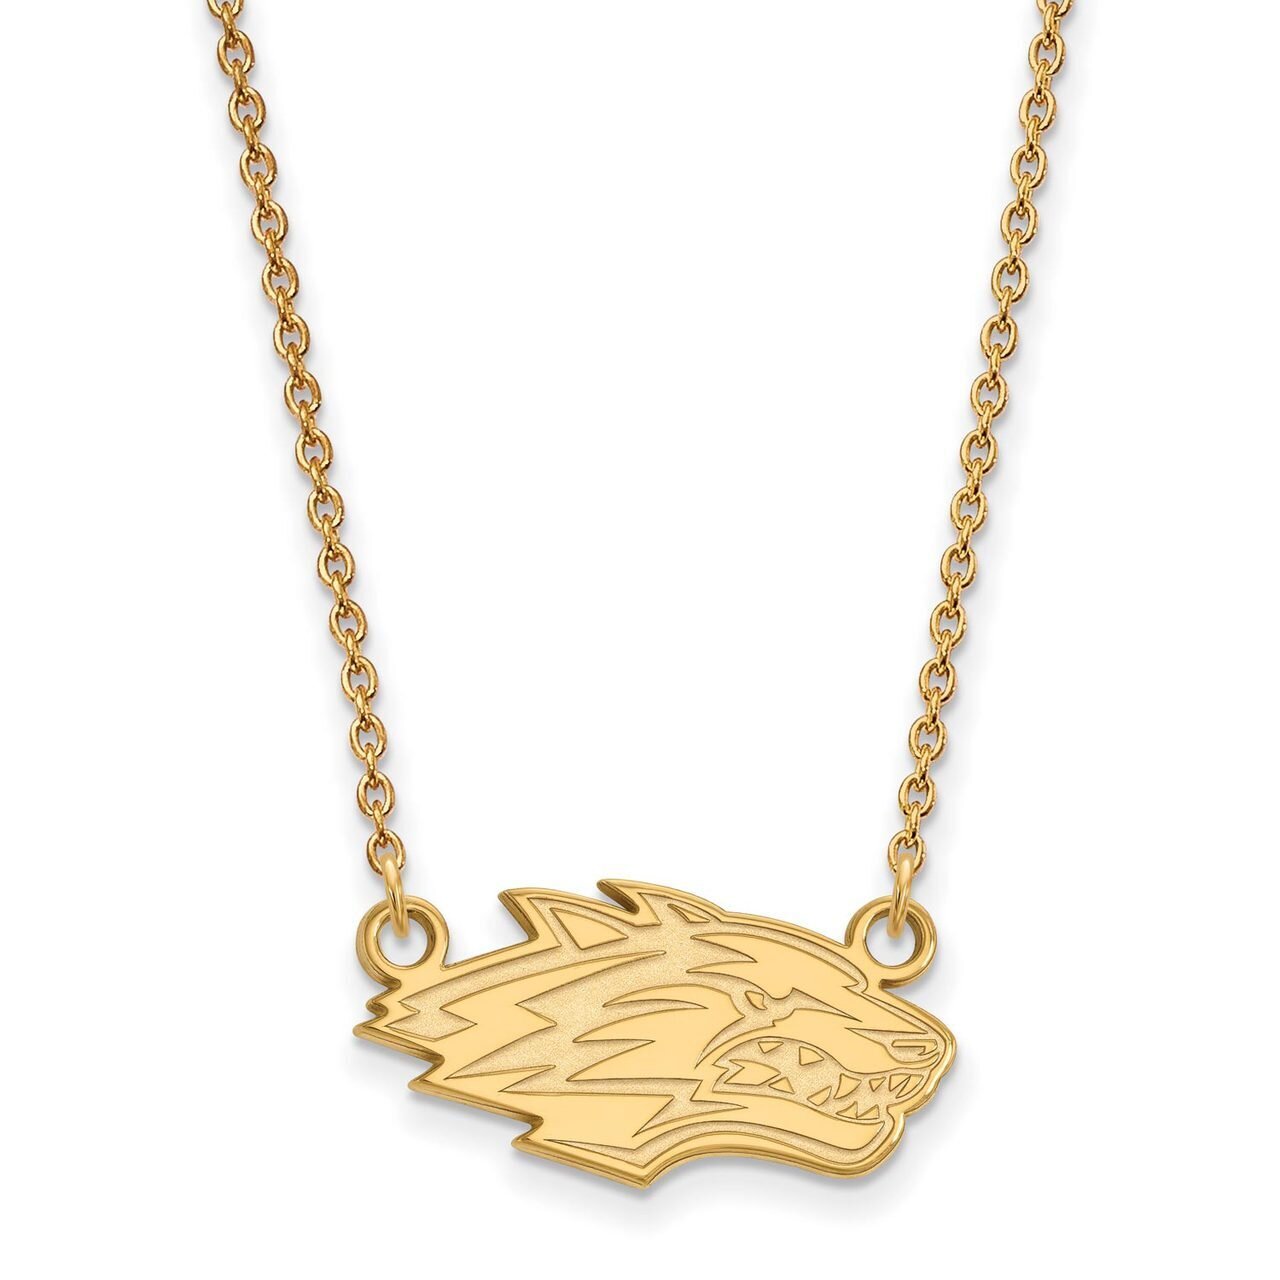 University of New Mexico Small Pendant with Chain Necklace 14k Yellow Gold 4Y008UNM-18